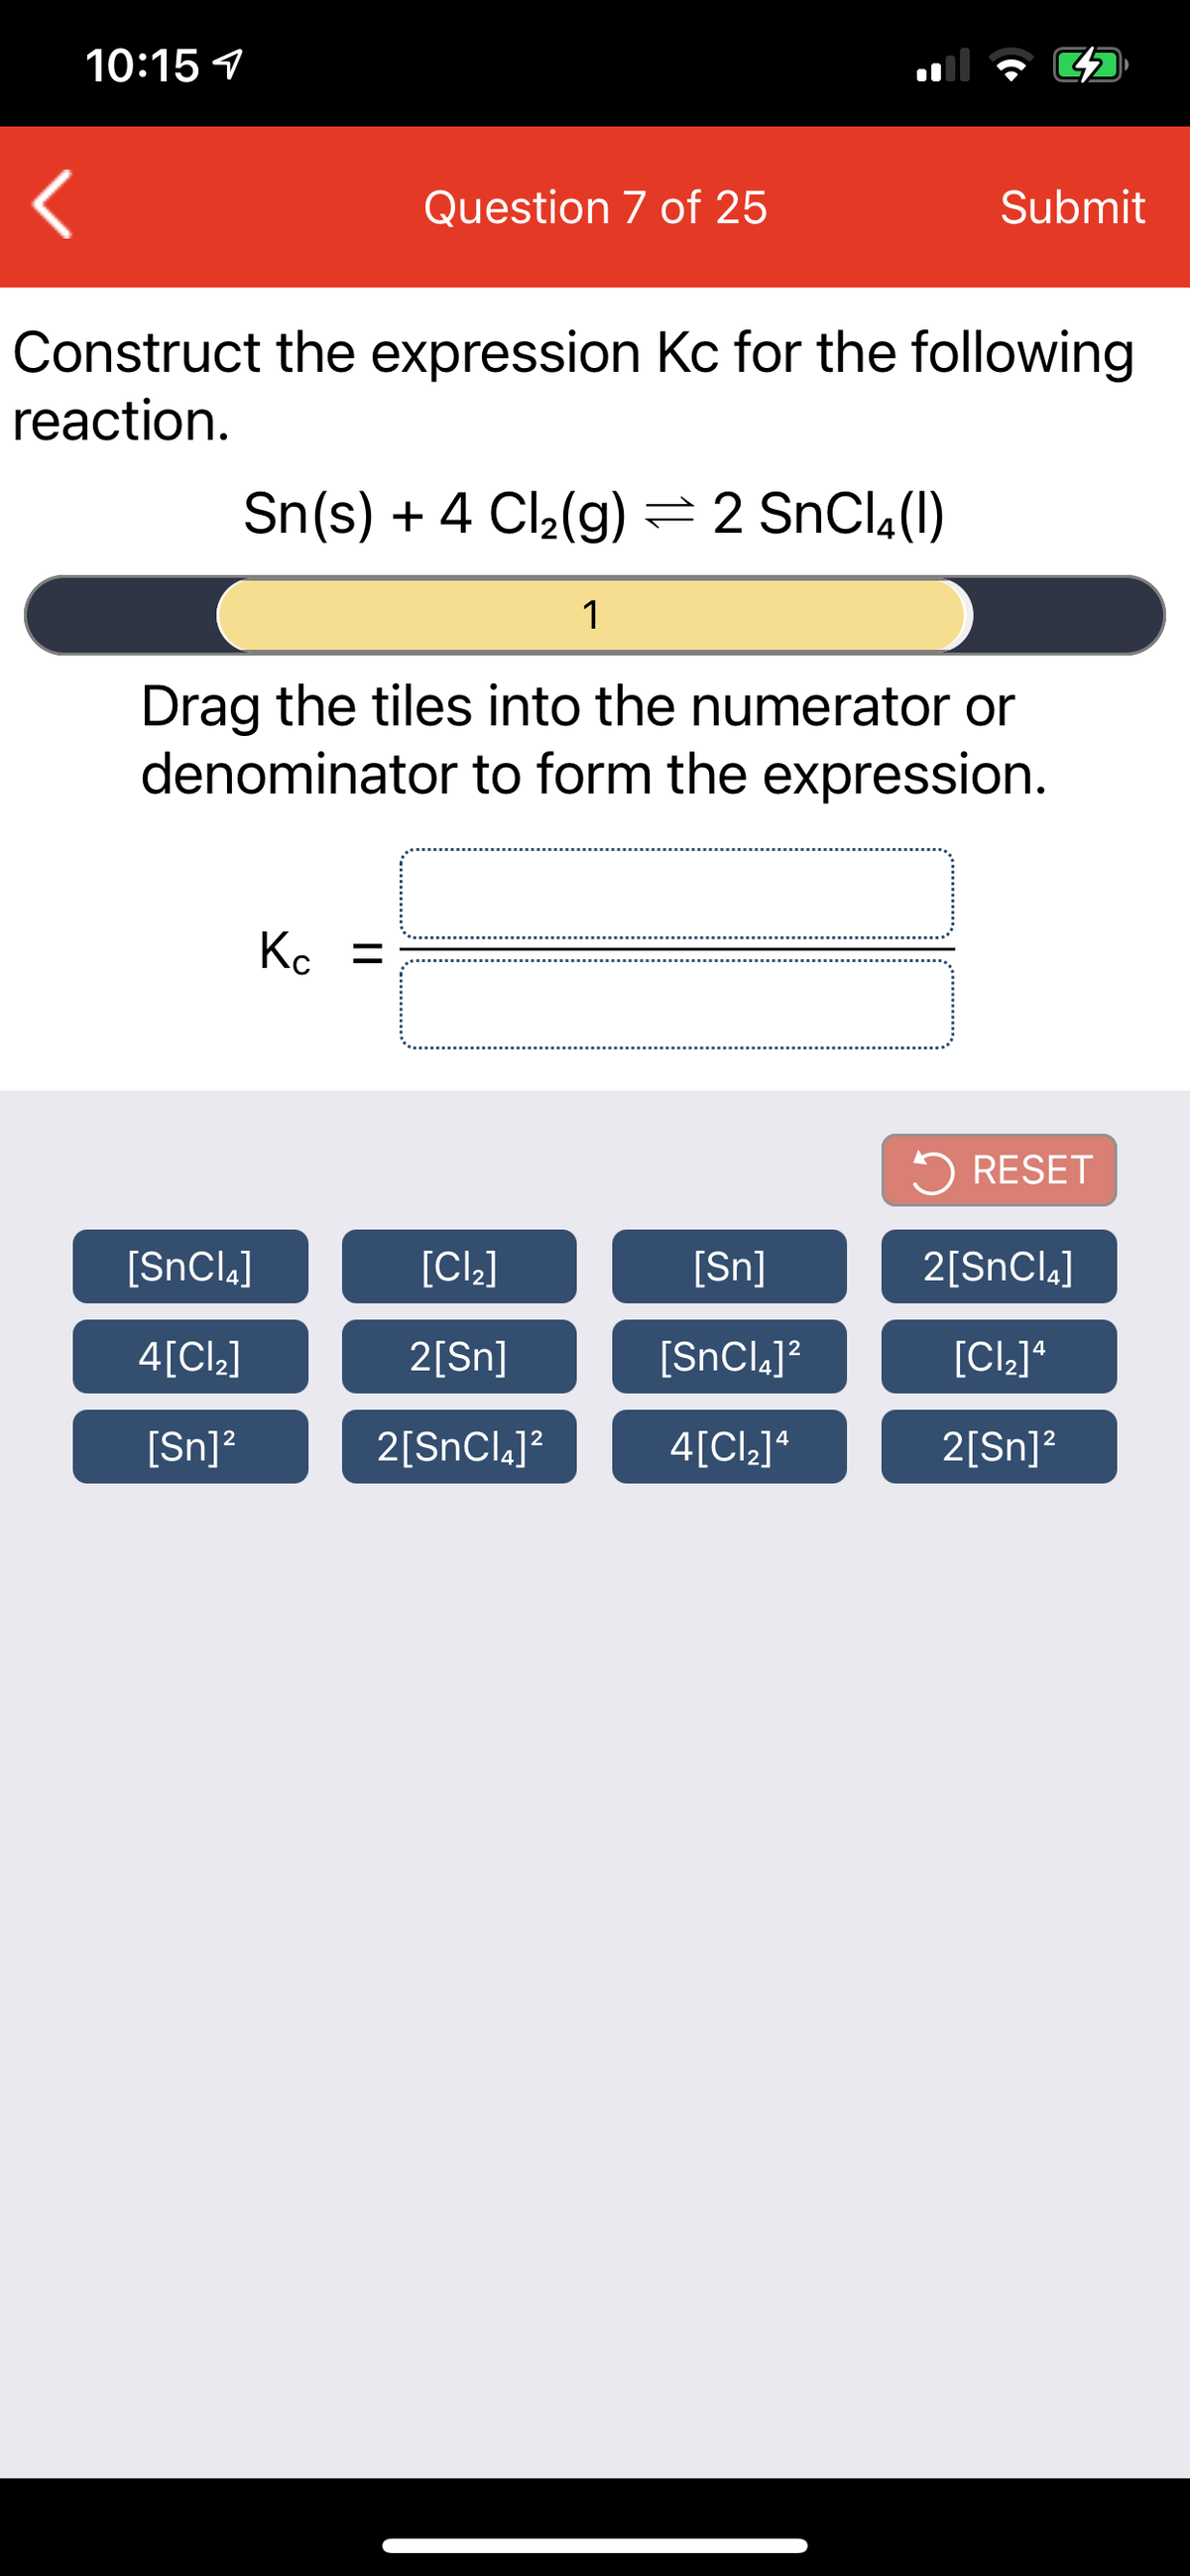 10:15 1
Question 7 of 25
Submit
Construct the expression Kc for the following
reaction.
Sn(s) + 4 Cl2(g) =2 SnCl4(1)
1
Drag the tiles into the numerator or
denominator to form the expression.
K. =
5 RESET
[SnCl.]
[Cl.]
[Sn]
2[SnCl4]
4[Cl2]
2[Sn]
[SnCl.]?
[Cl,]*
[Sn]?
2[SnCl.]?
4[Cl_]*
2[Sn]?
